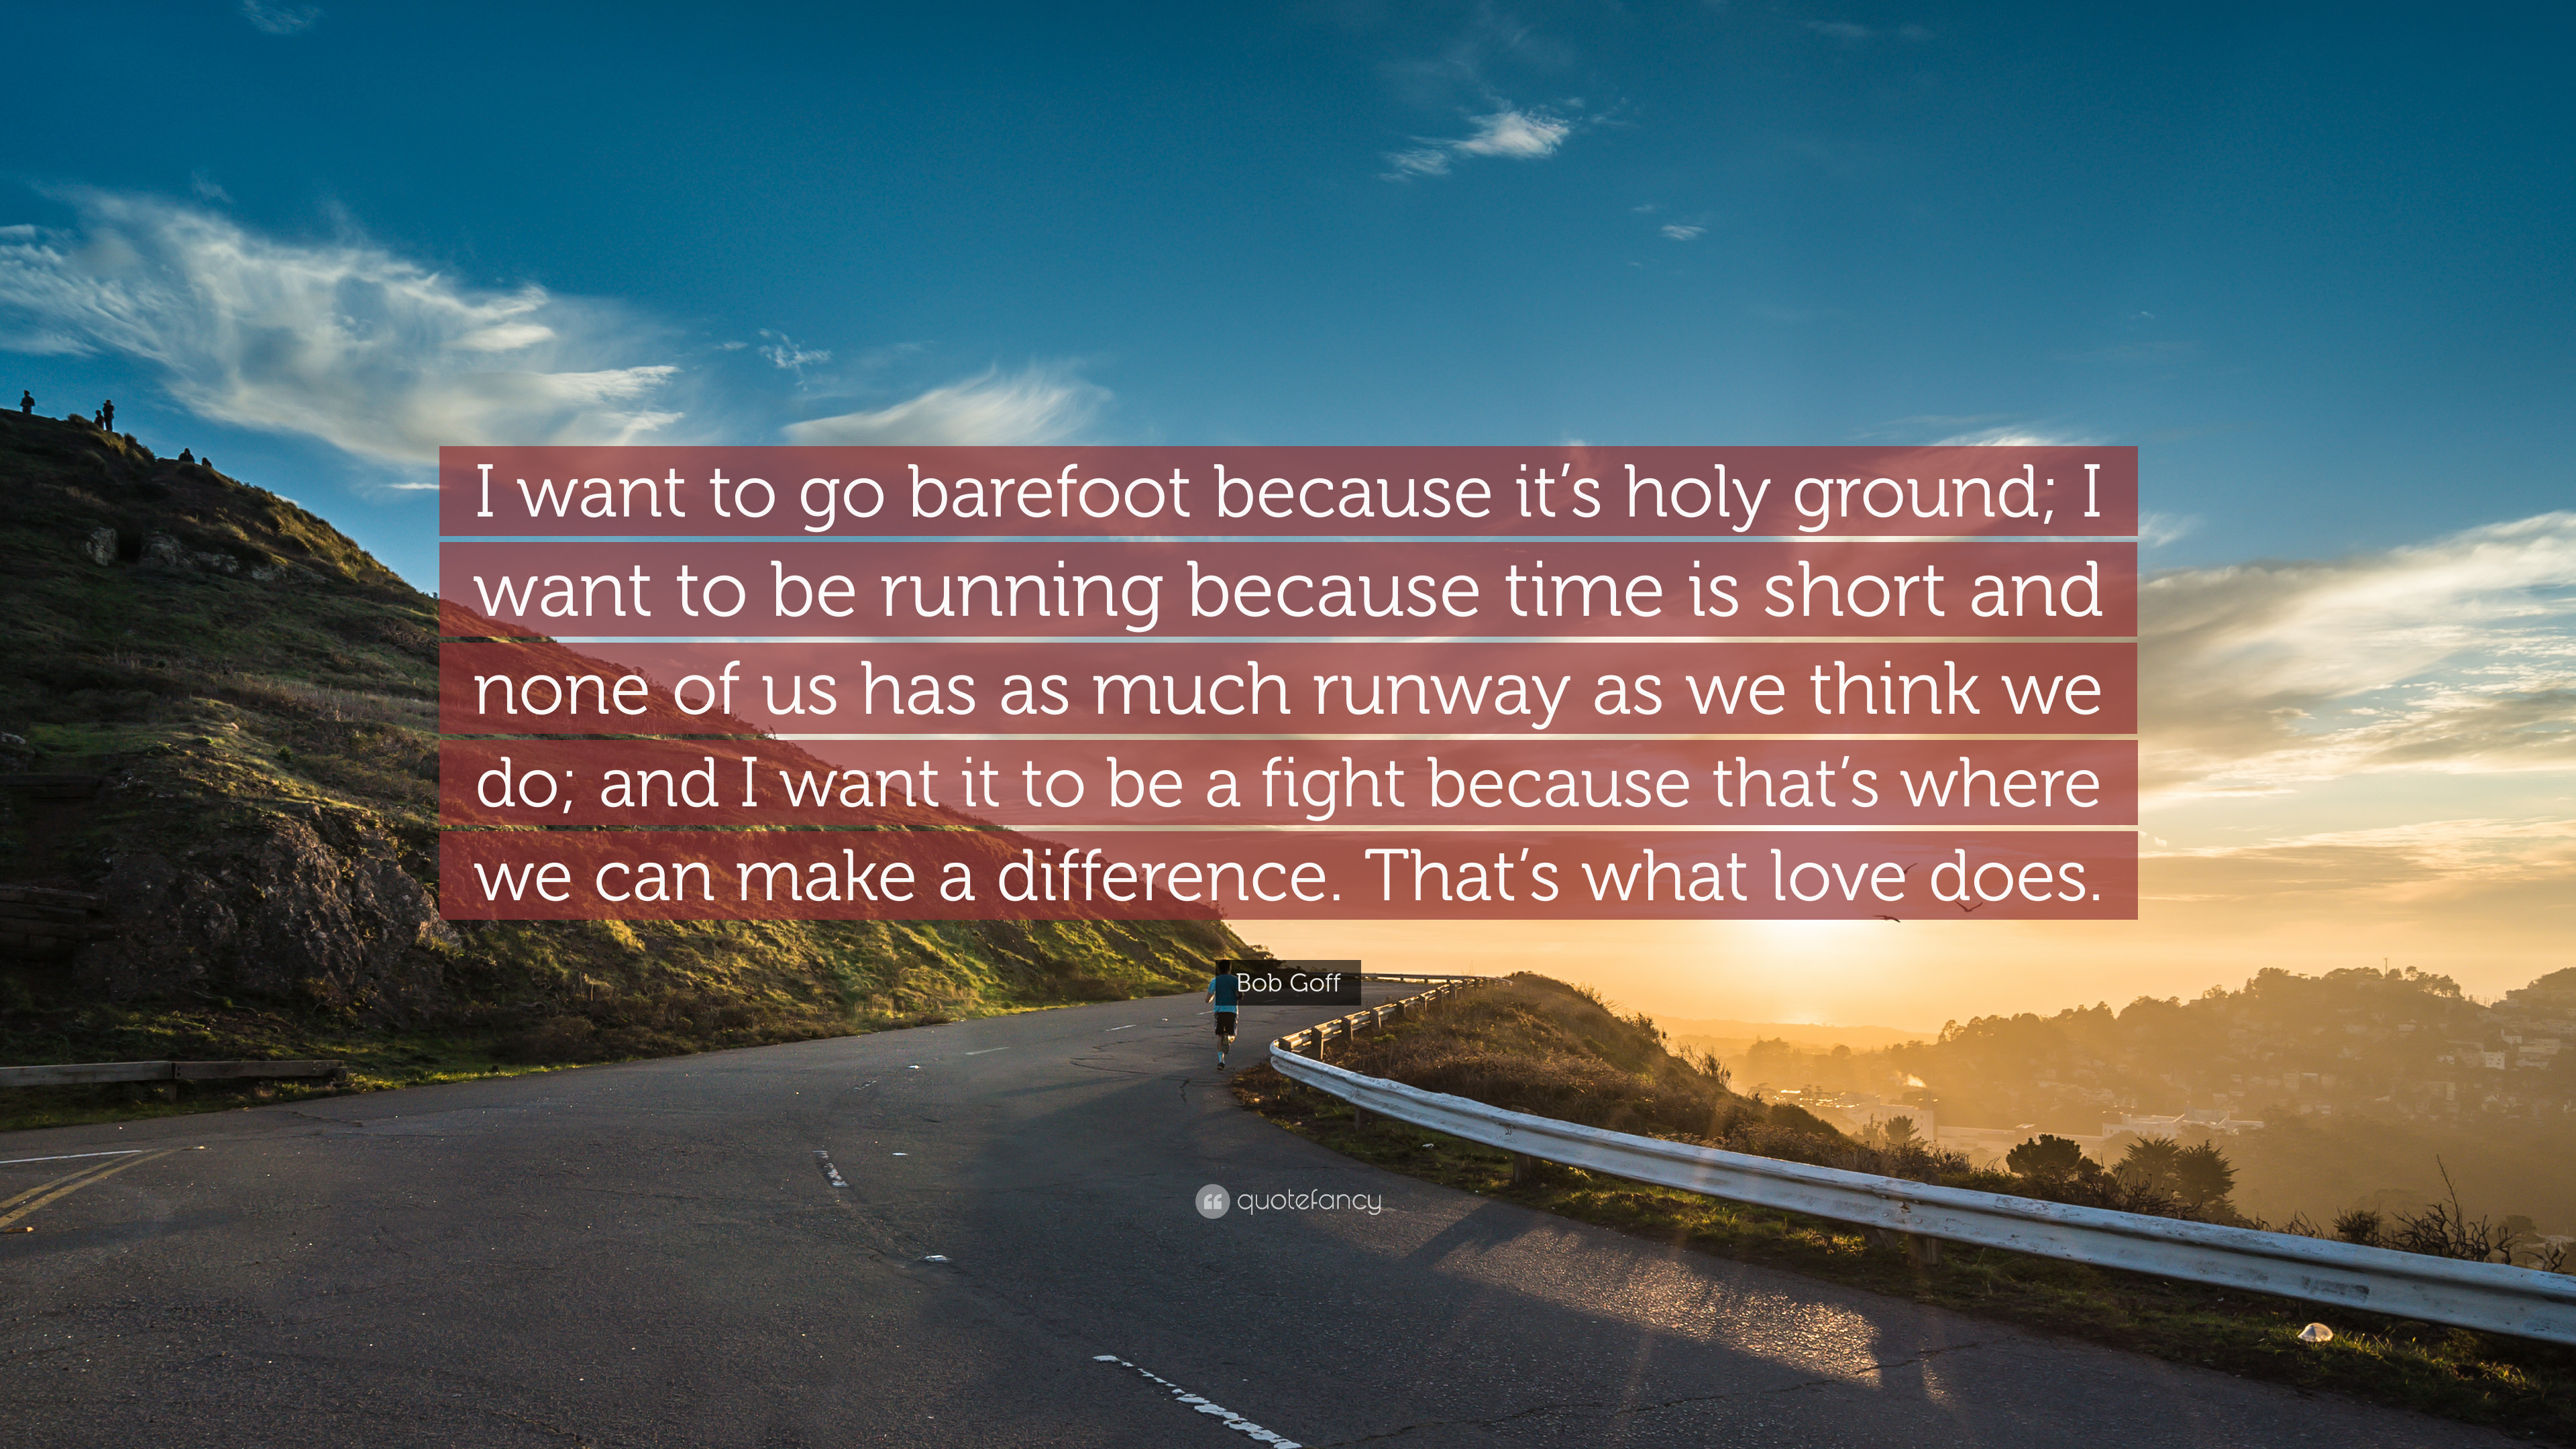 3840x2160 Bob Goff Quote: “I want to go barefoot because it's holy ground; I